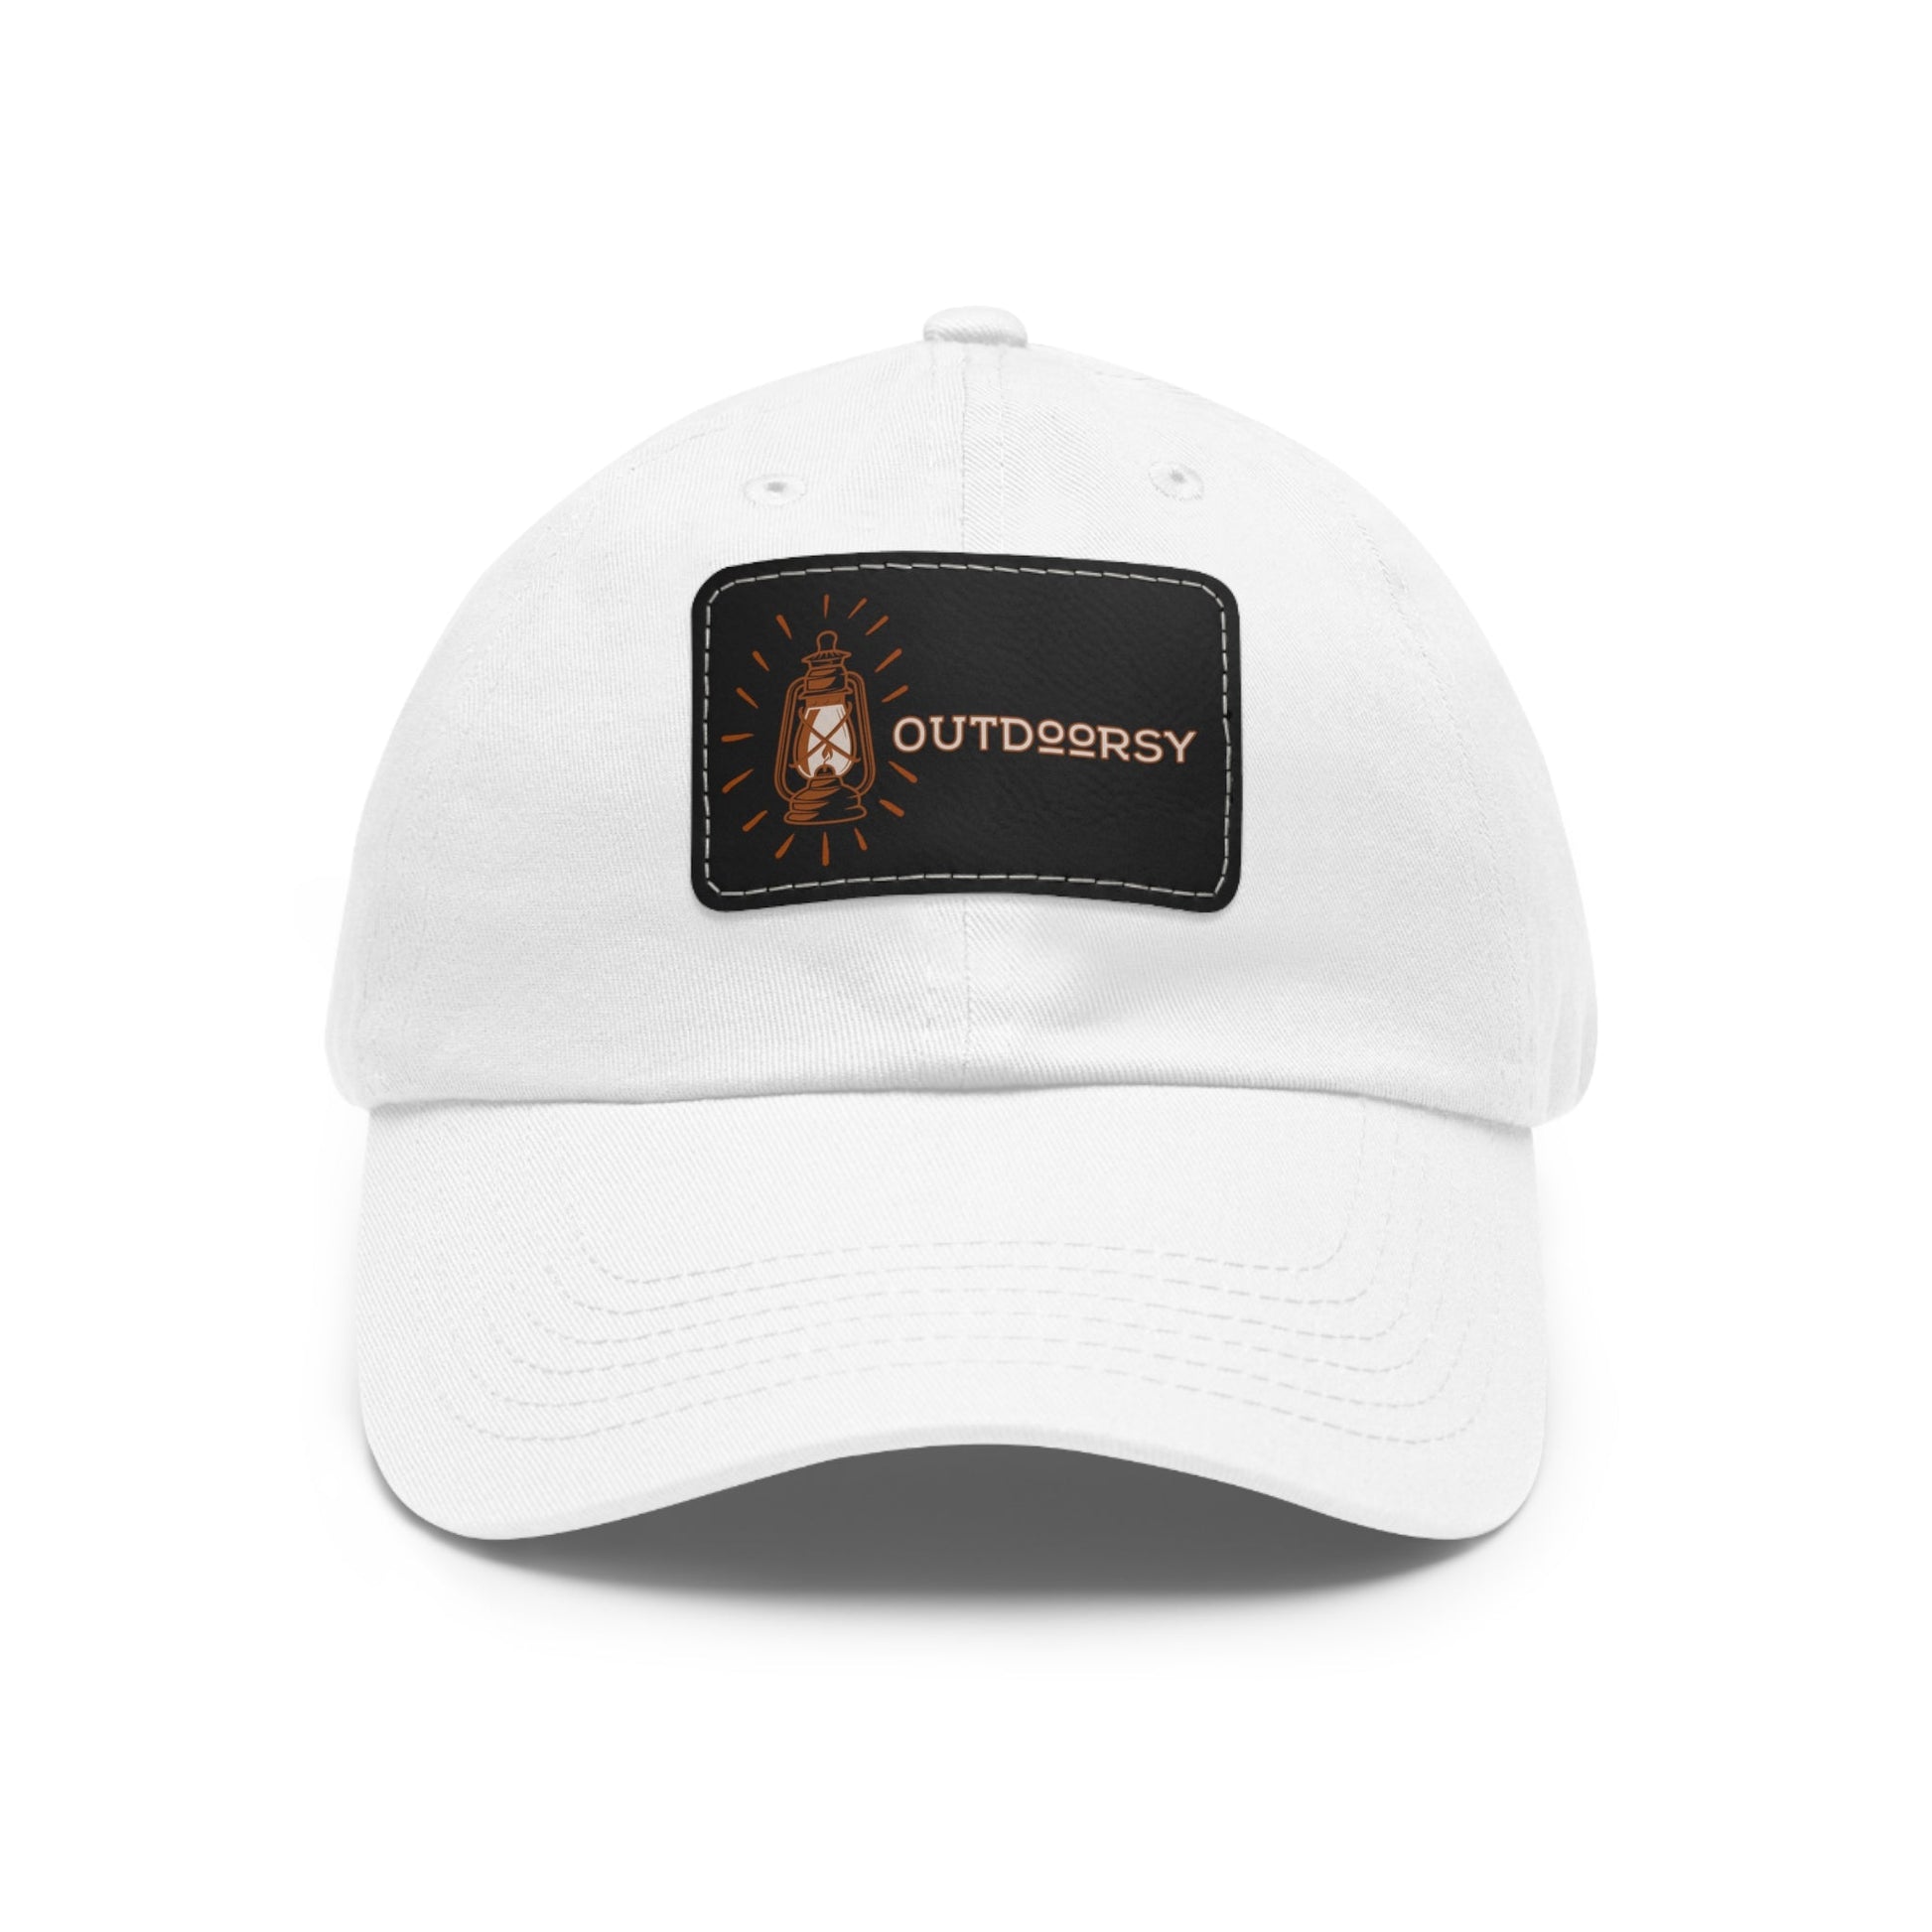 Outdoorsy Dad Hat with Leather Patch - Appalachian Bittersweet - Hats